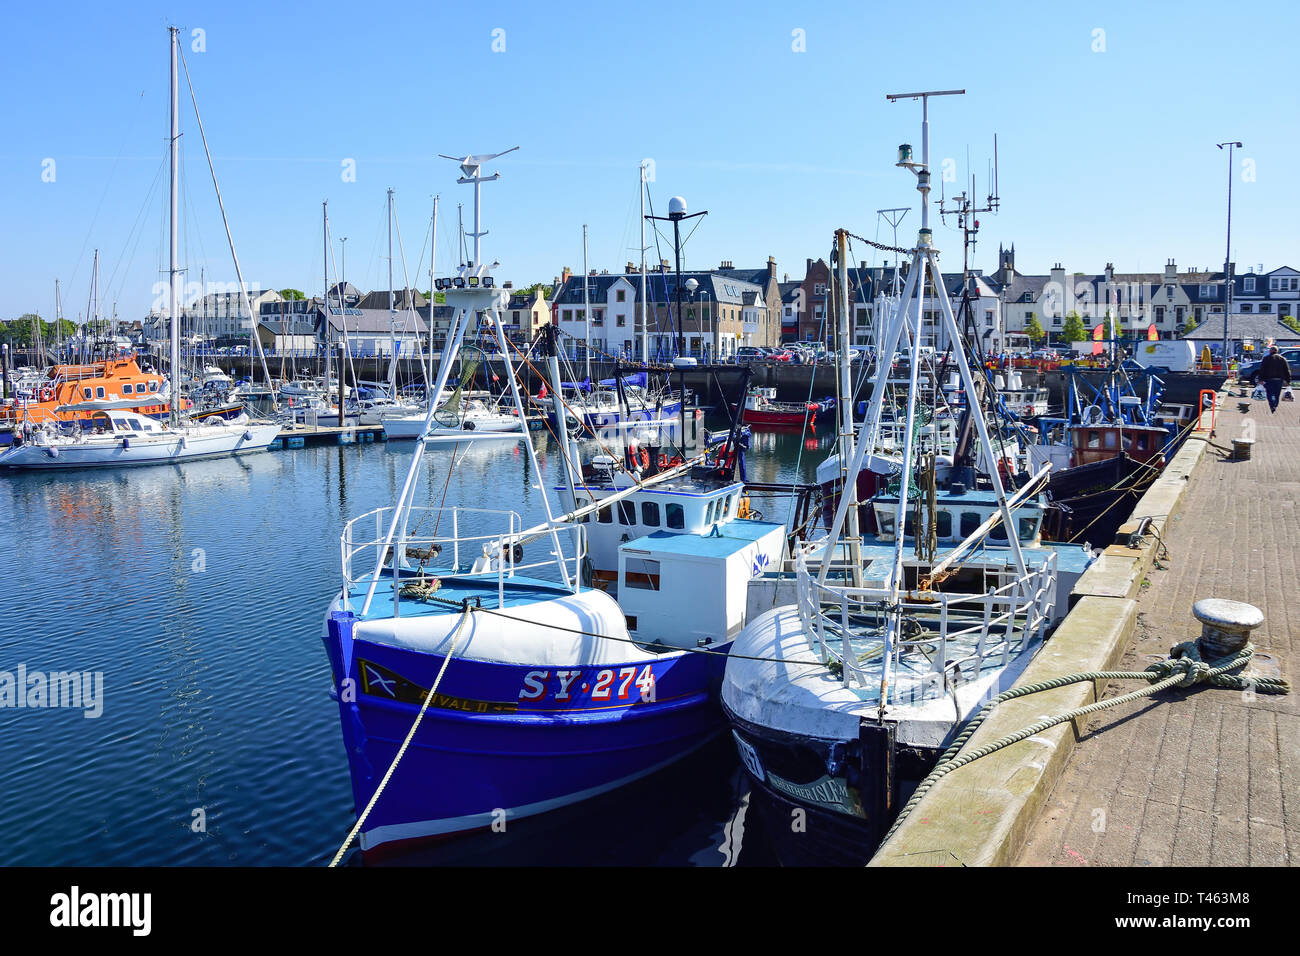 Fishing boats moored in Stornoway Harbour, Stornoway, Isle of Lewis, Outer Hebrides, Na h-Eileanan Siar, Scotland, United Kingdom Stock Photo